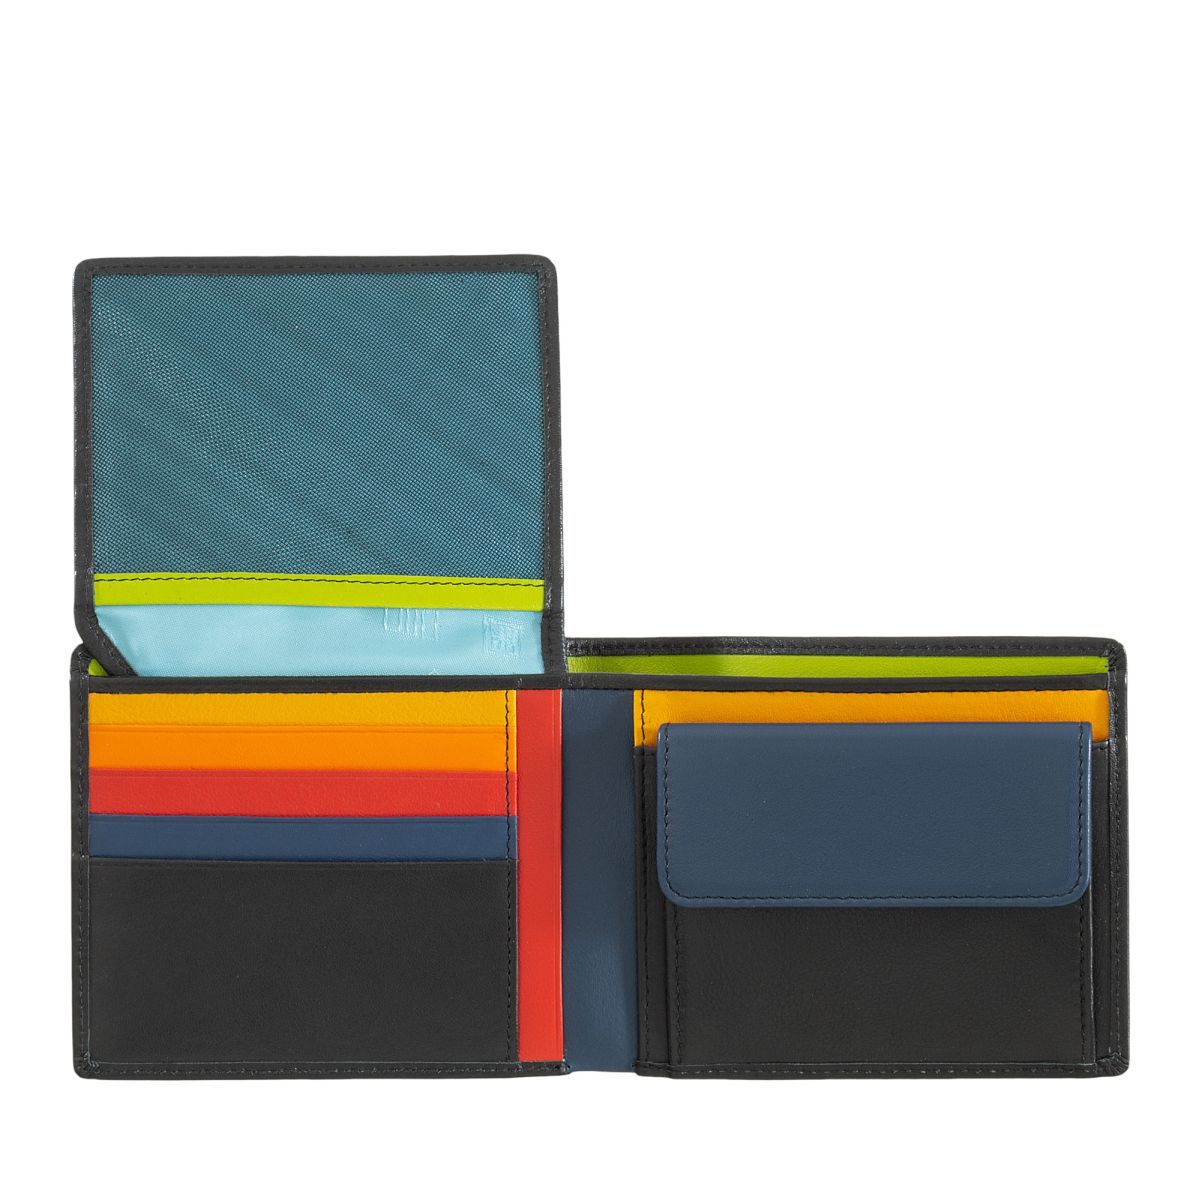 DuDu Leather classic multi color wallet with coin purse and inside flap - Black